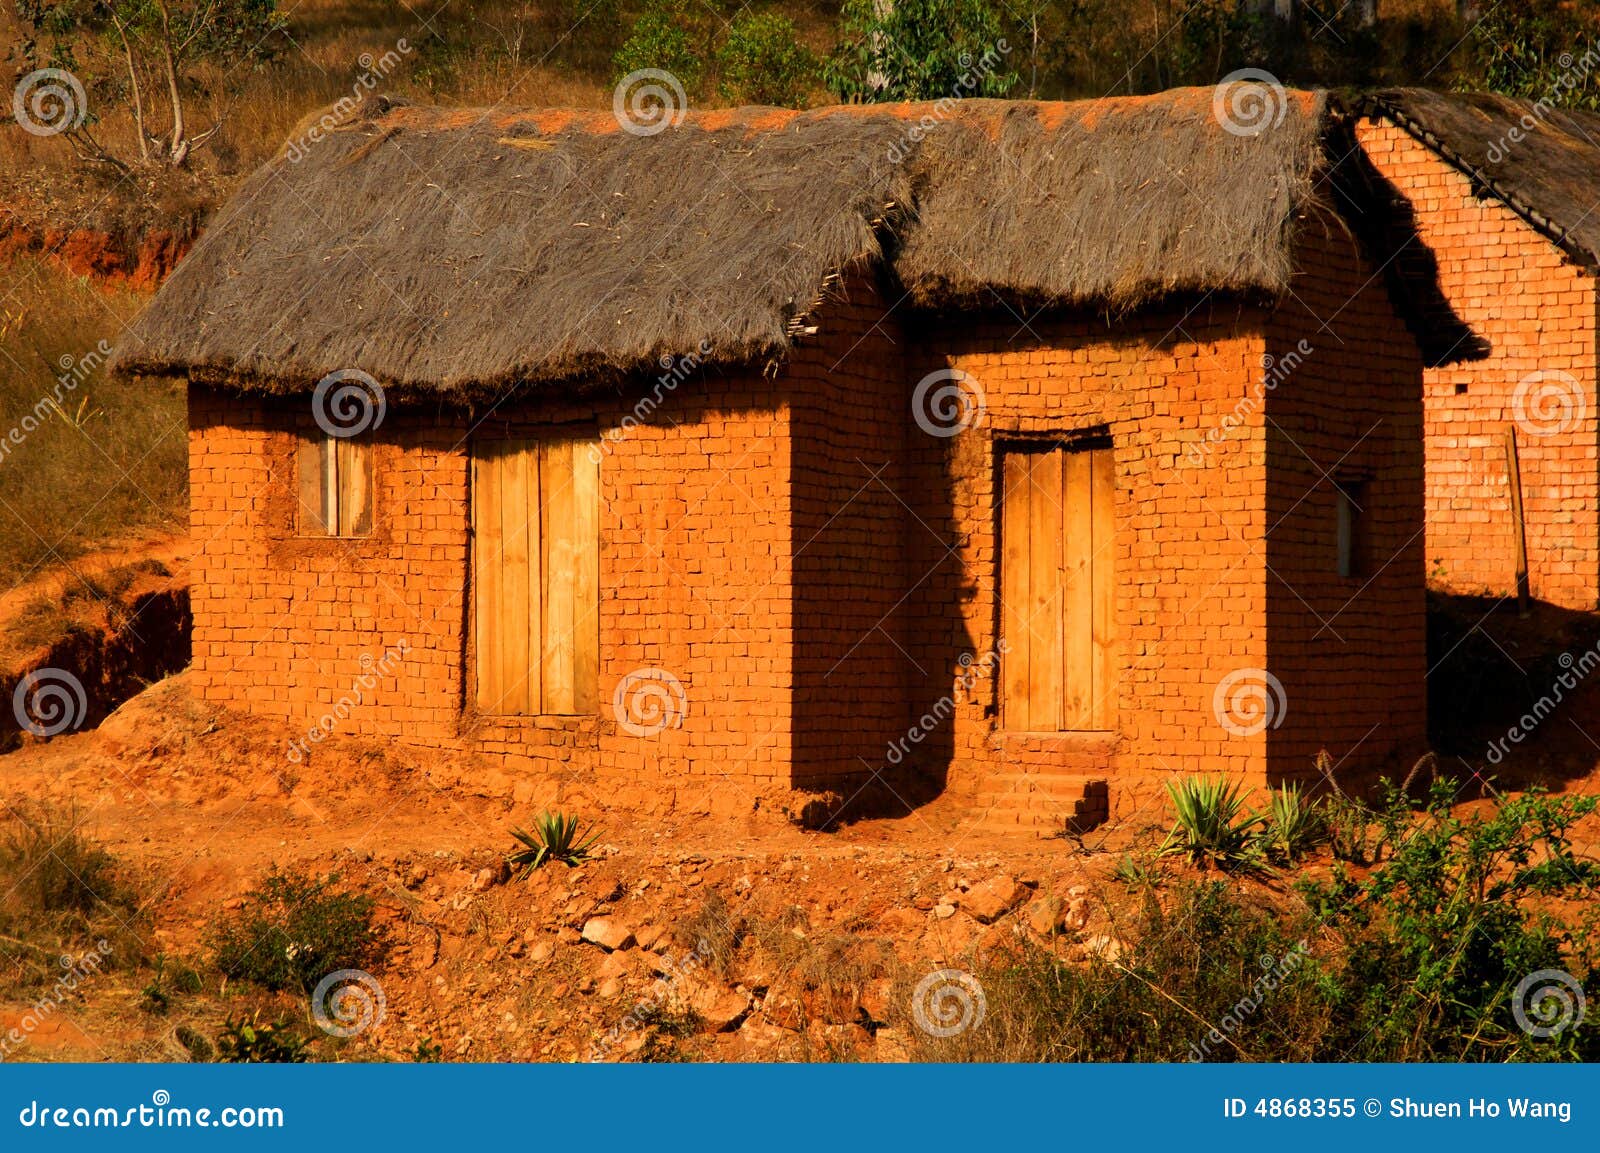 Clay hut stock image. Image of hotel, cabin, vegetable - 4868355